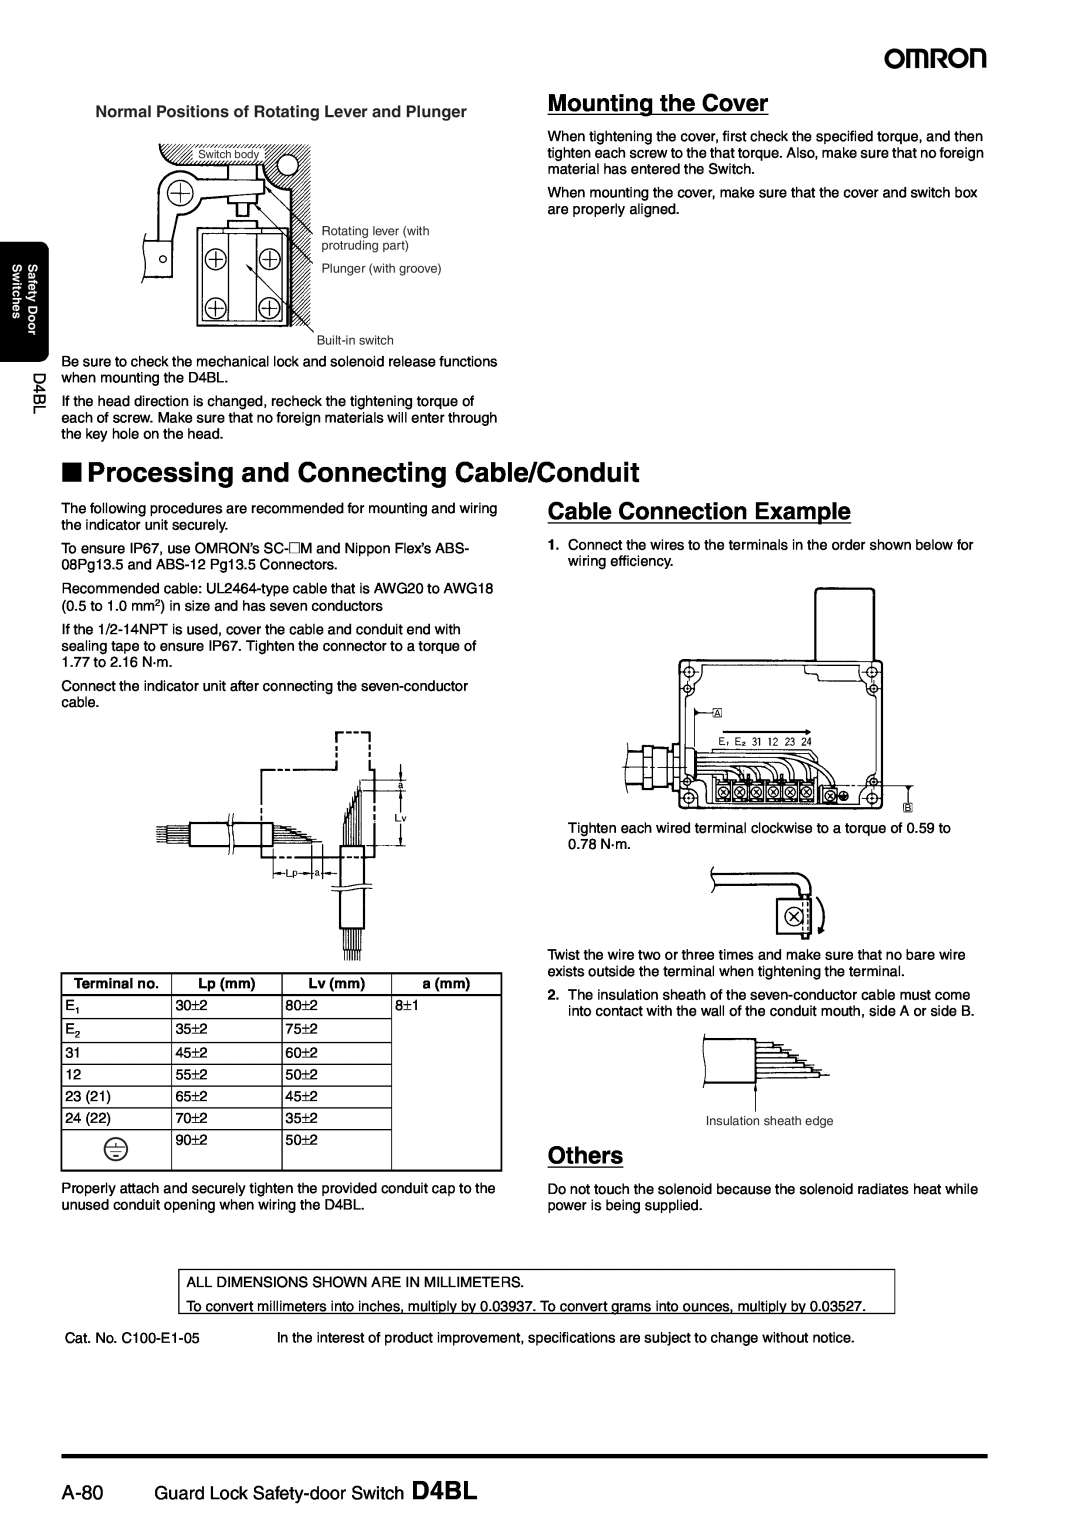 Omron D4BL manual Processing and Connecting Cable/Conduit, Mounting the Cover, Cable Connection Example, Others 